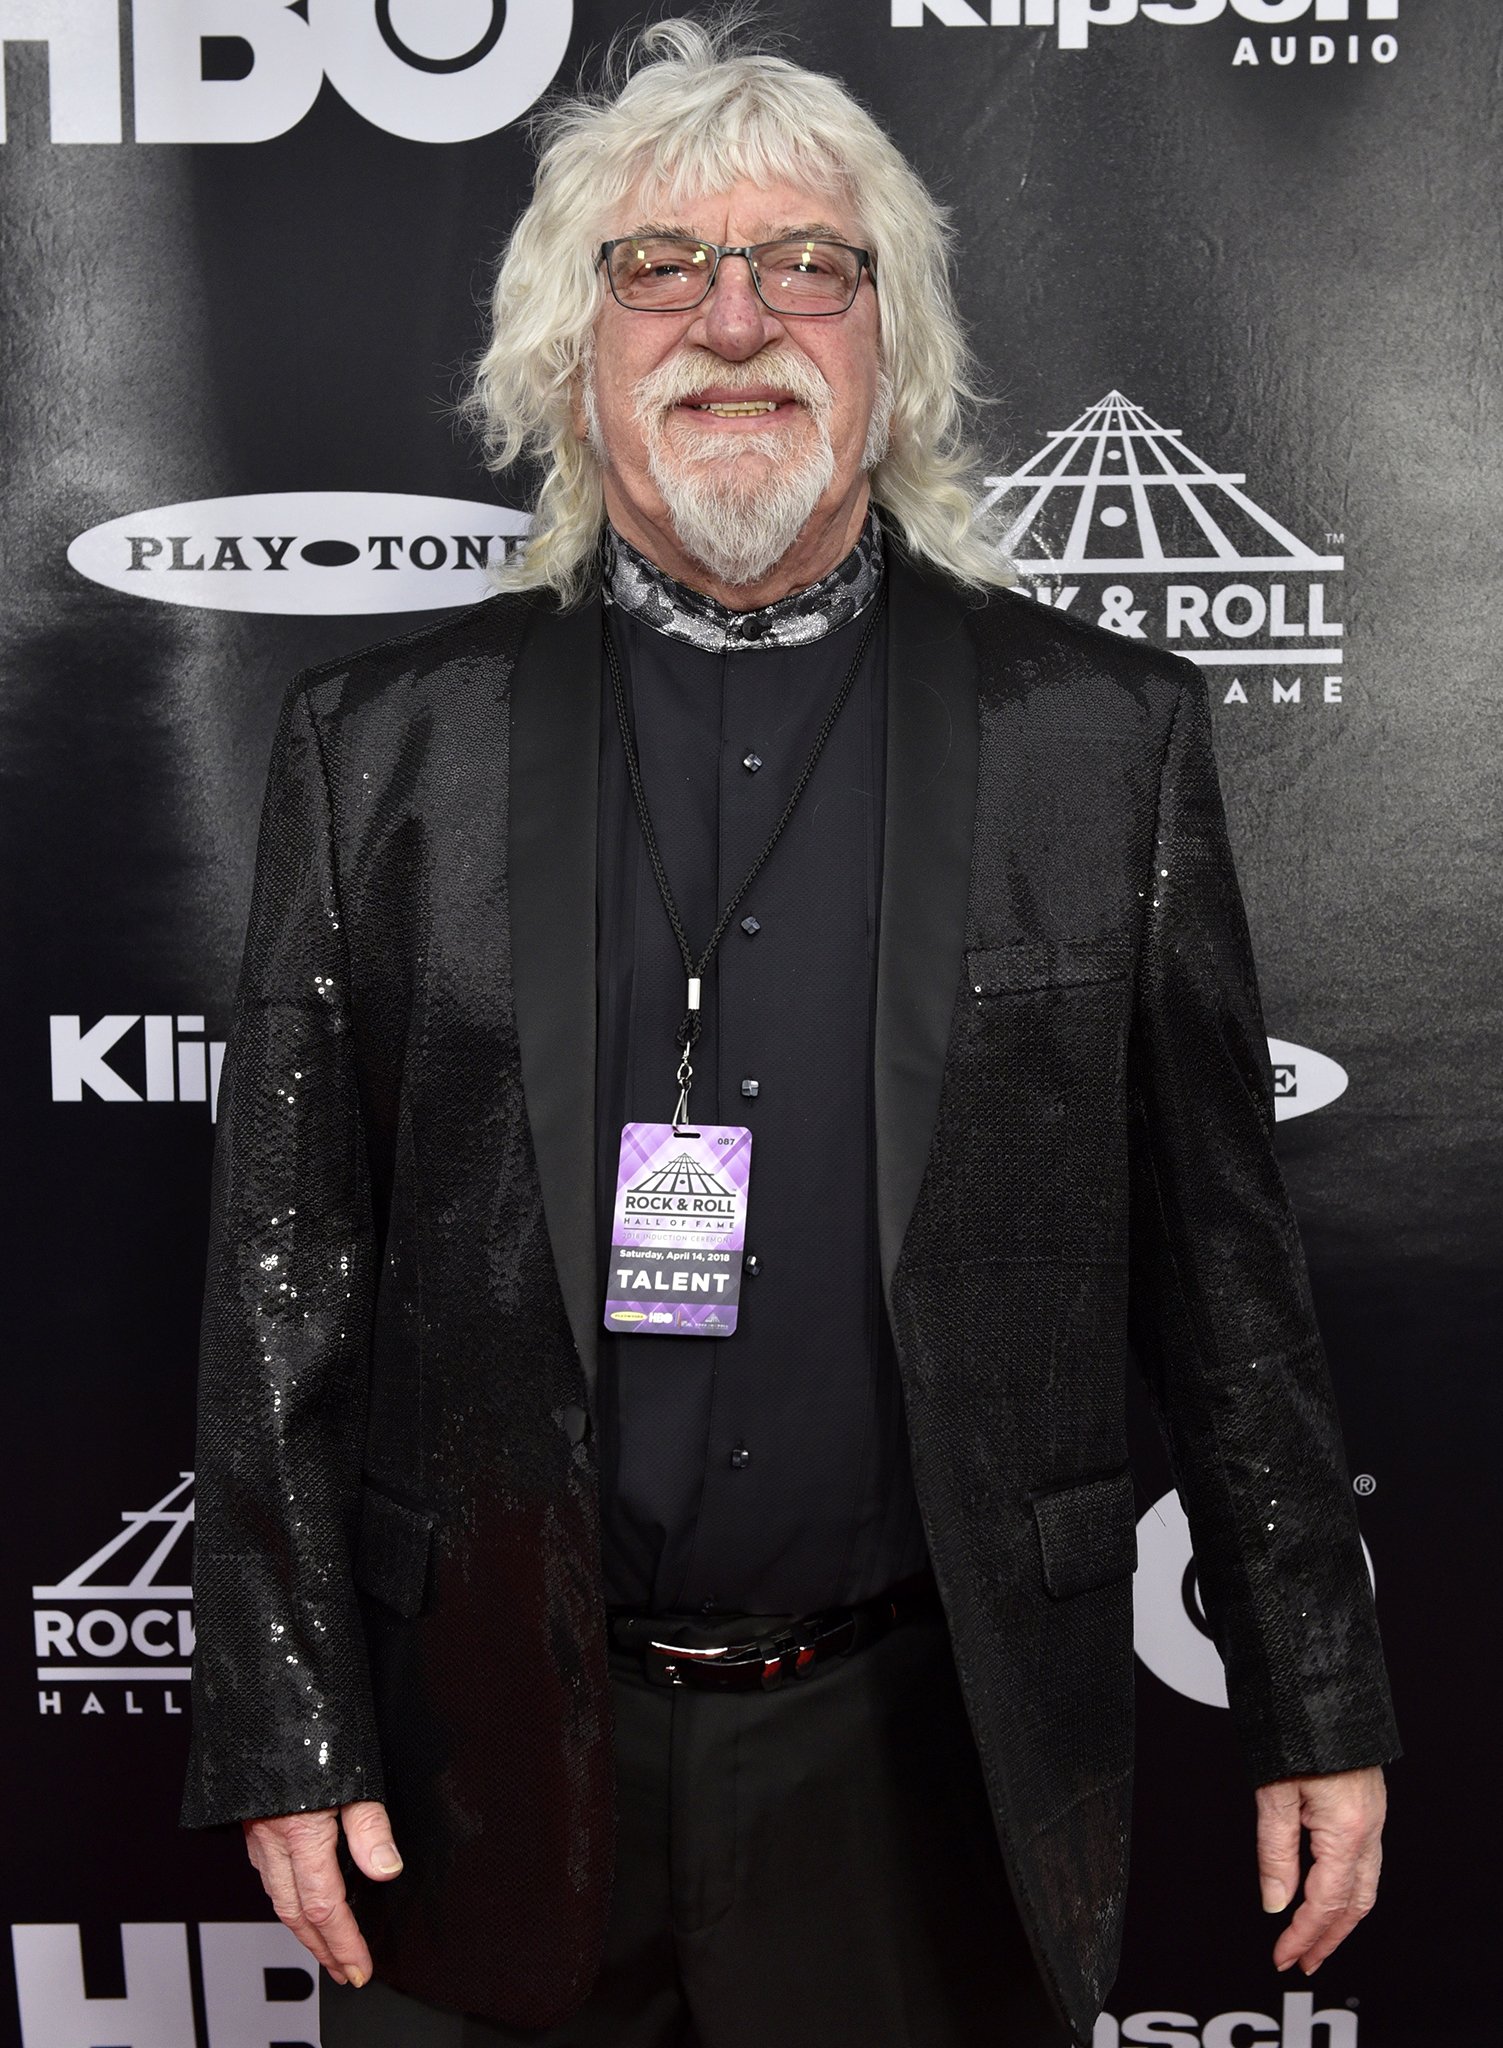 Rock star Graeme Edge suffered a stroke in 2016 and died of metastatic cancer at 80